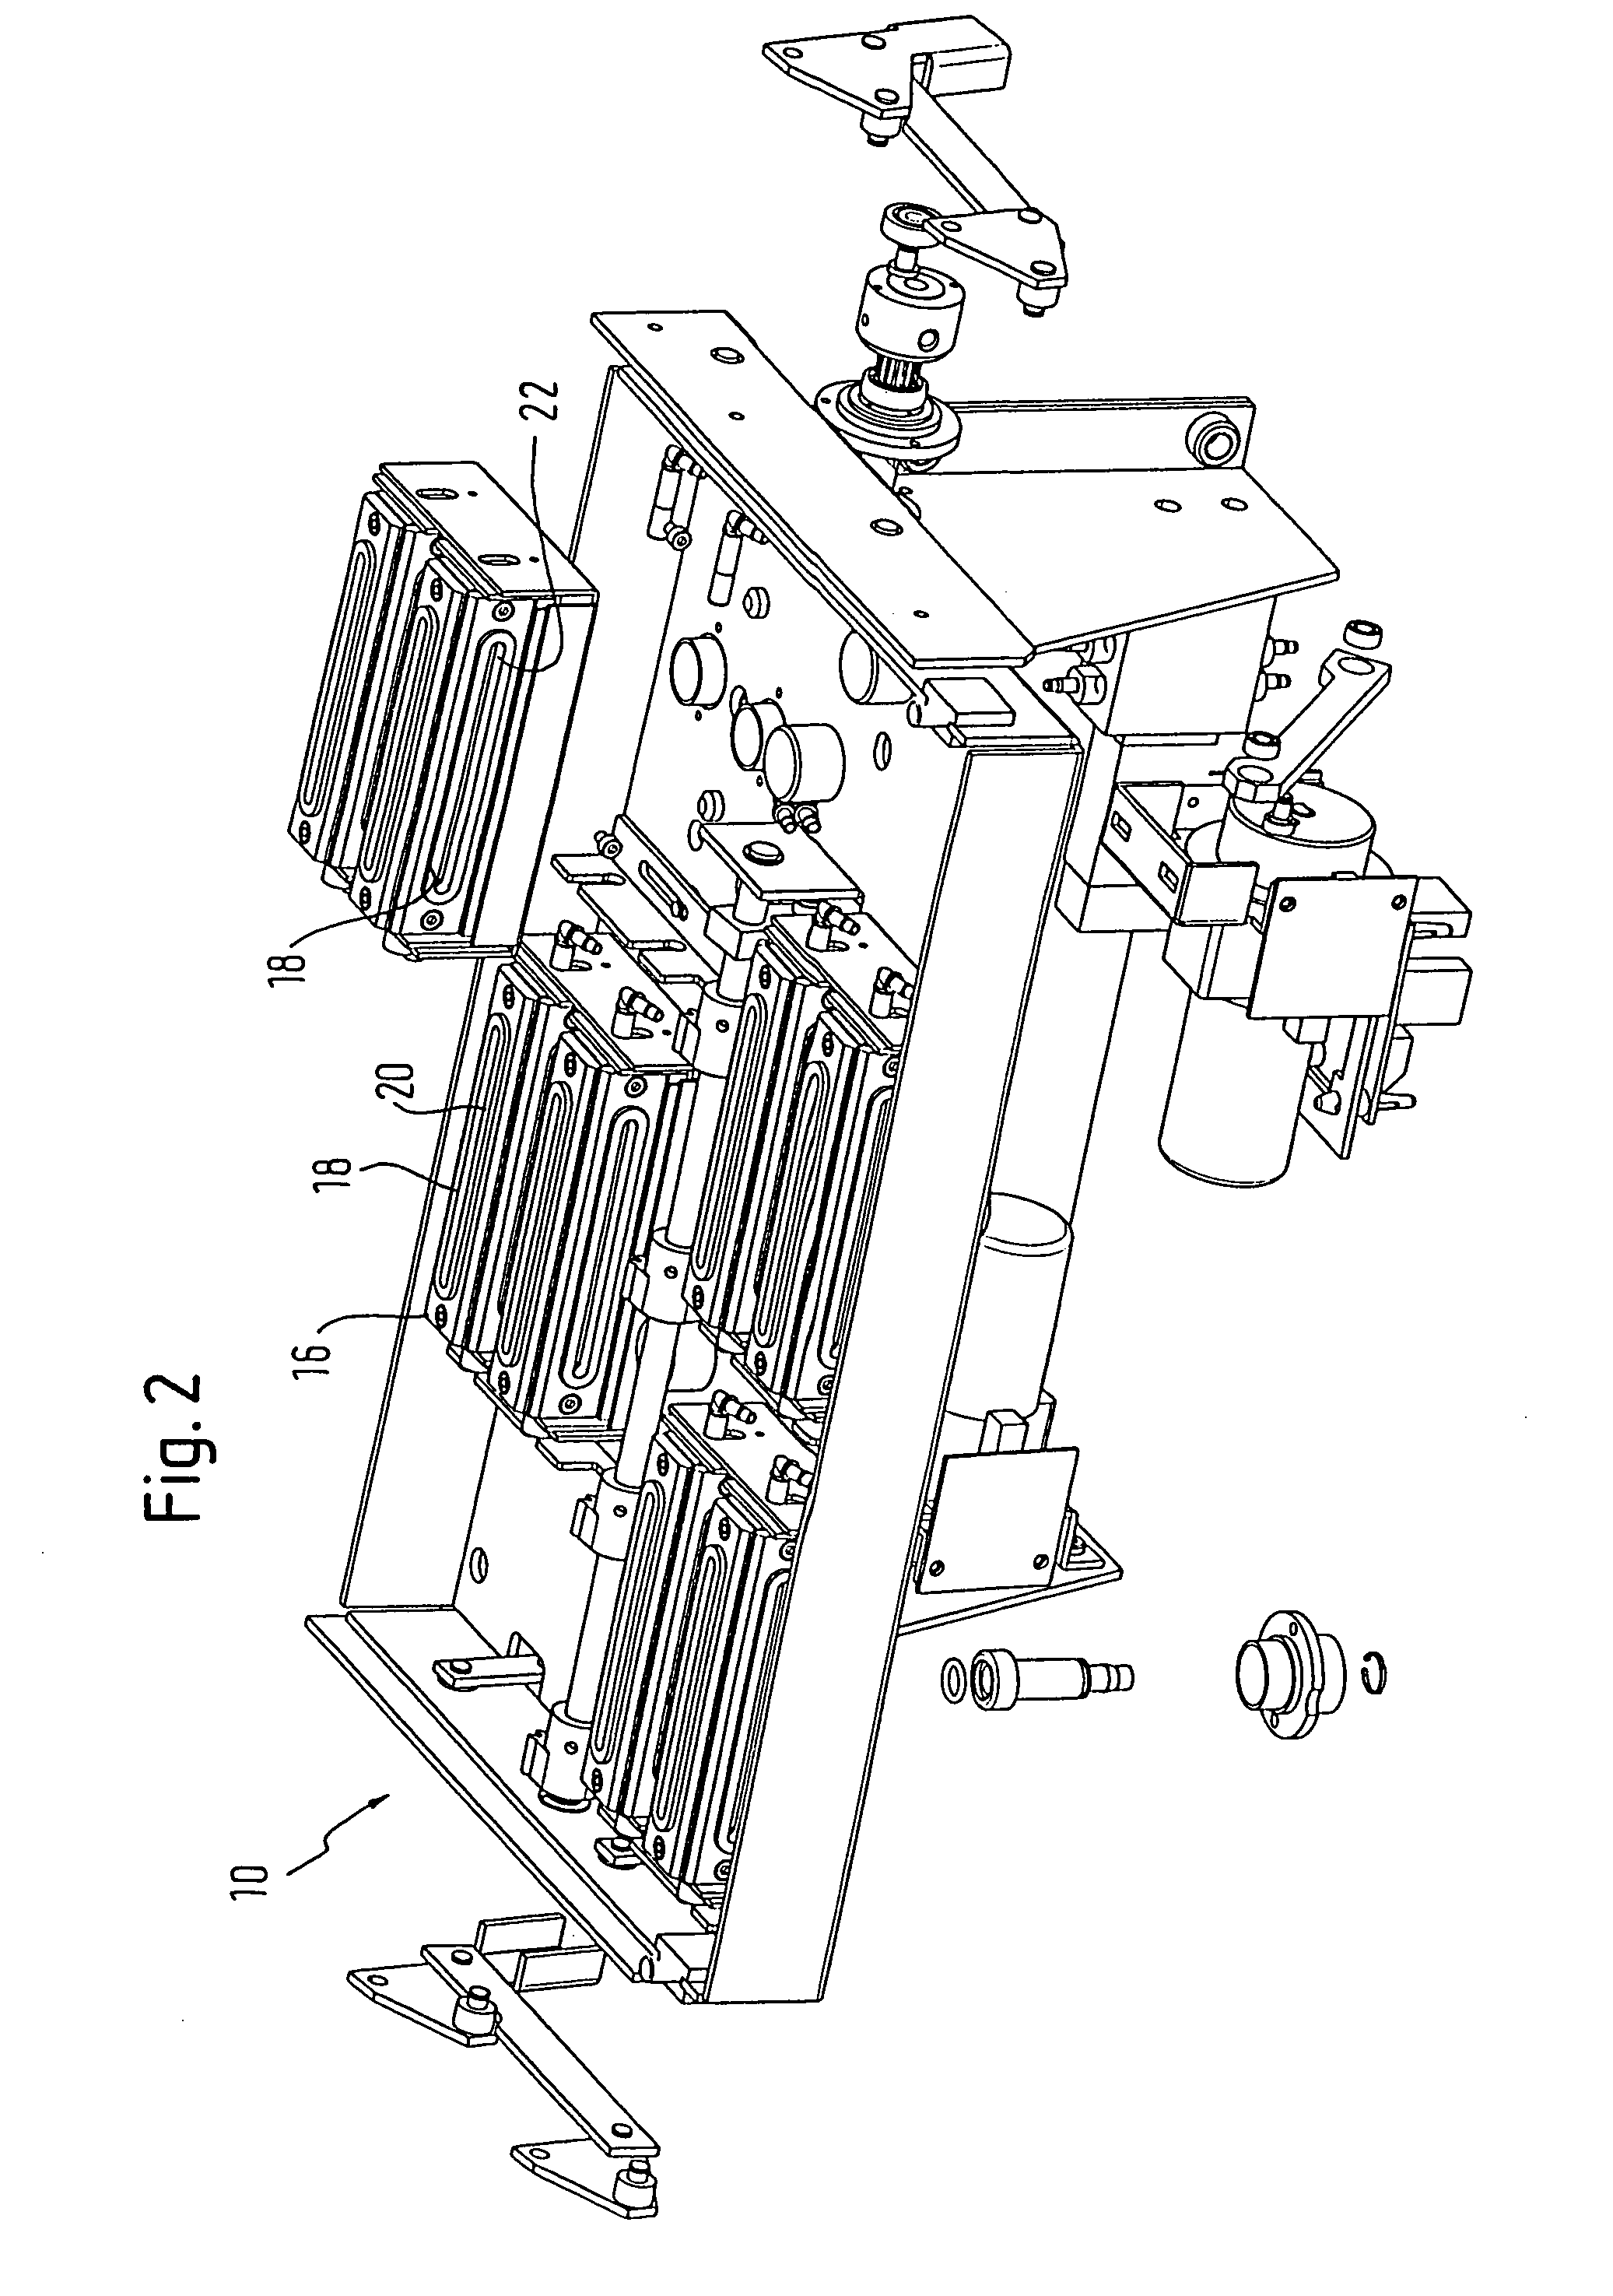 Cleaning unit for an inkjet printing device